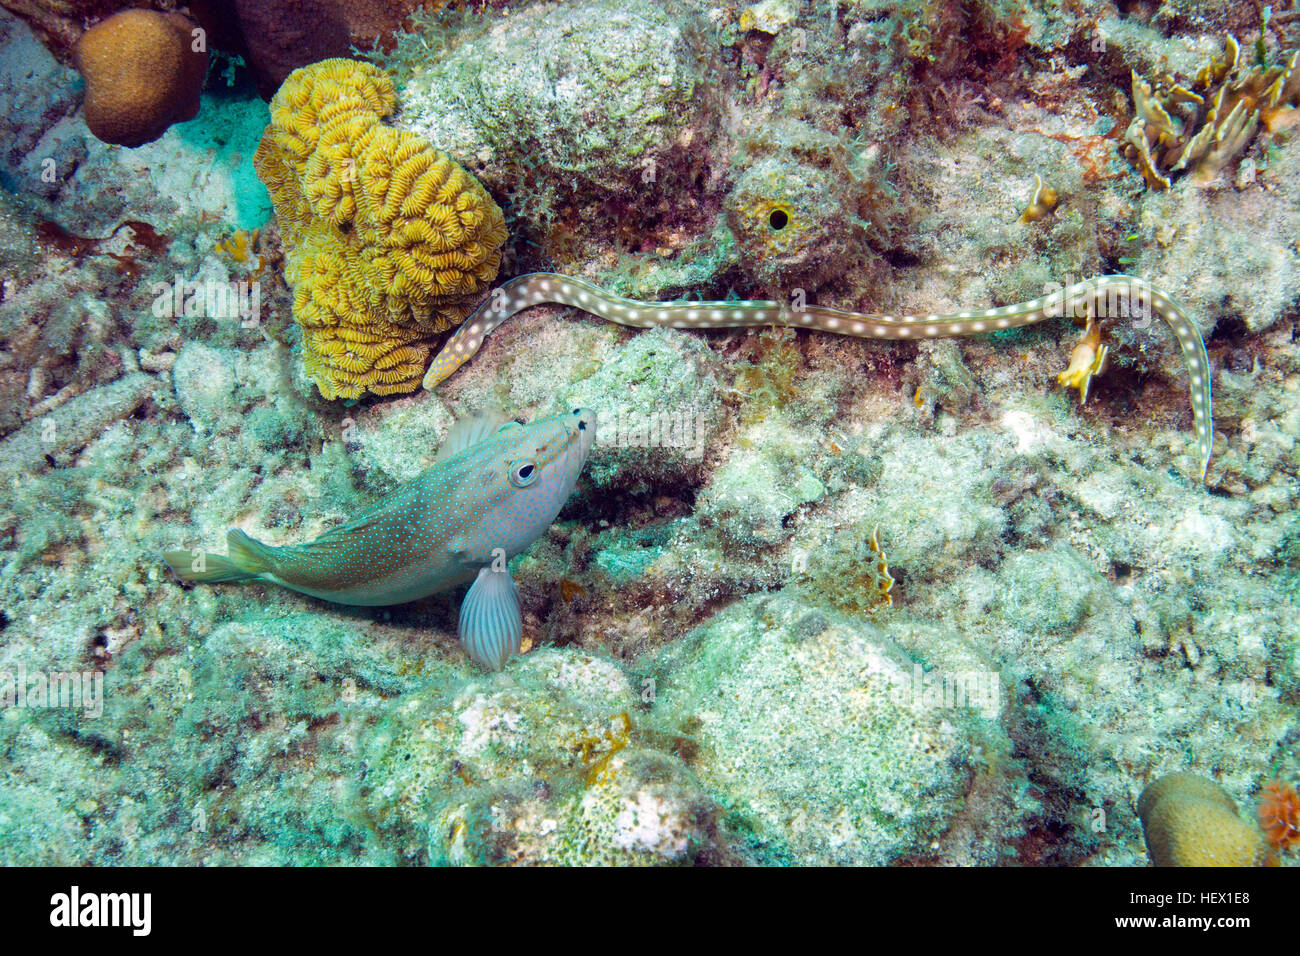 A Sharptail snake eel, Myrichthys breviceps, forages in coral reef. Stock Photo